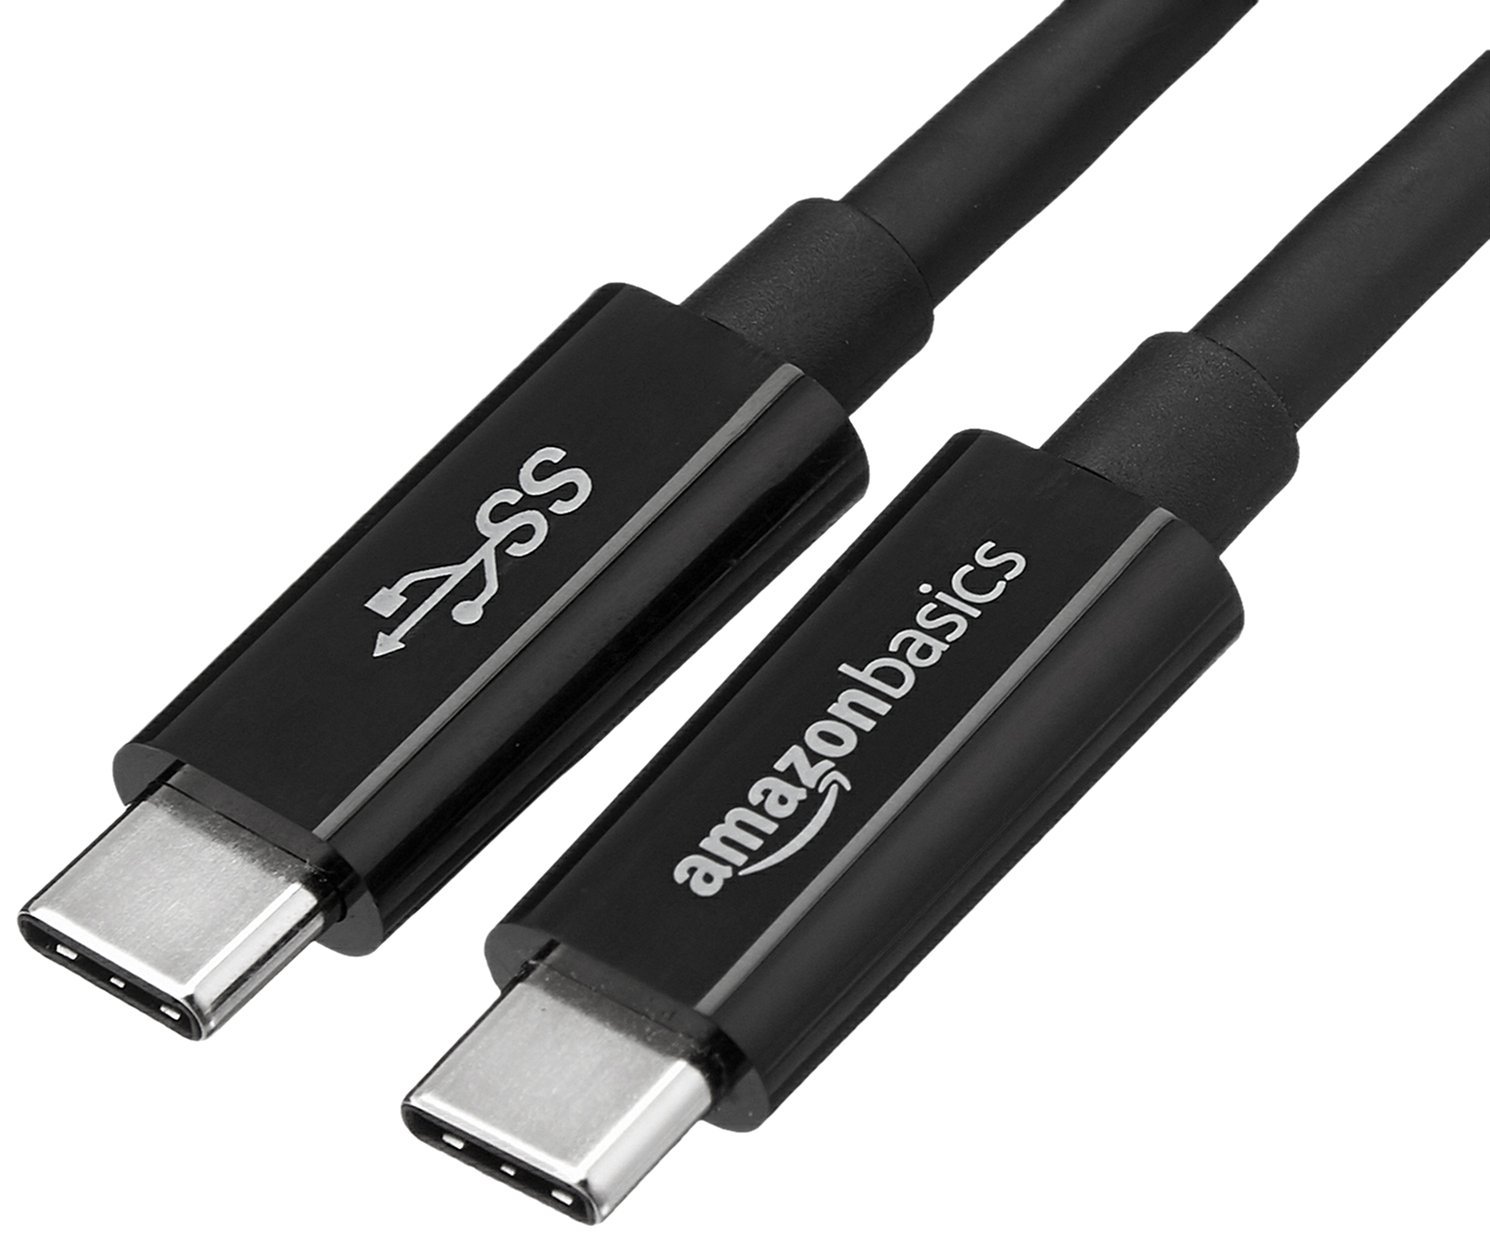 Amazon: Buy AmazonBasics 6 Feet USB Type C to USB Type C 3.1 Gen1 Cable at Rs 449 only